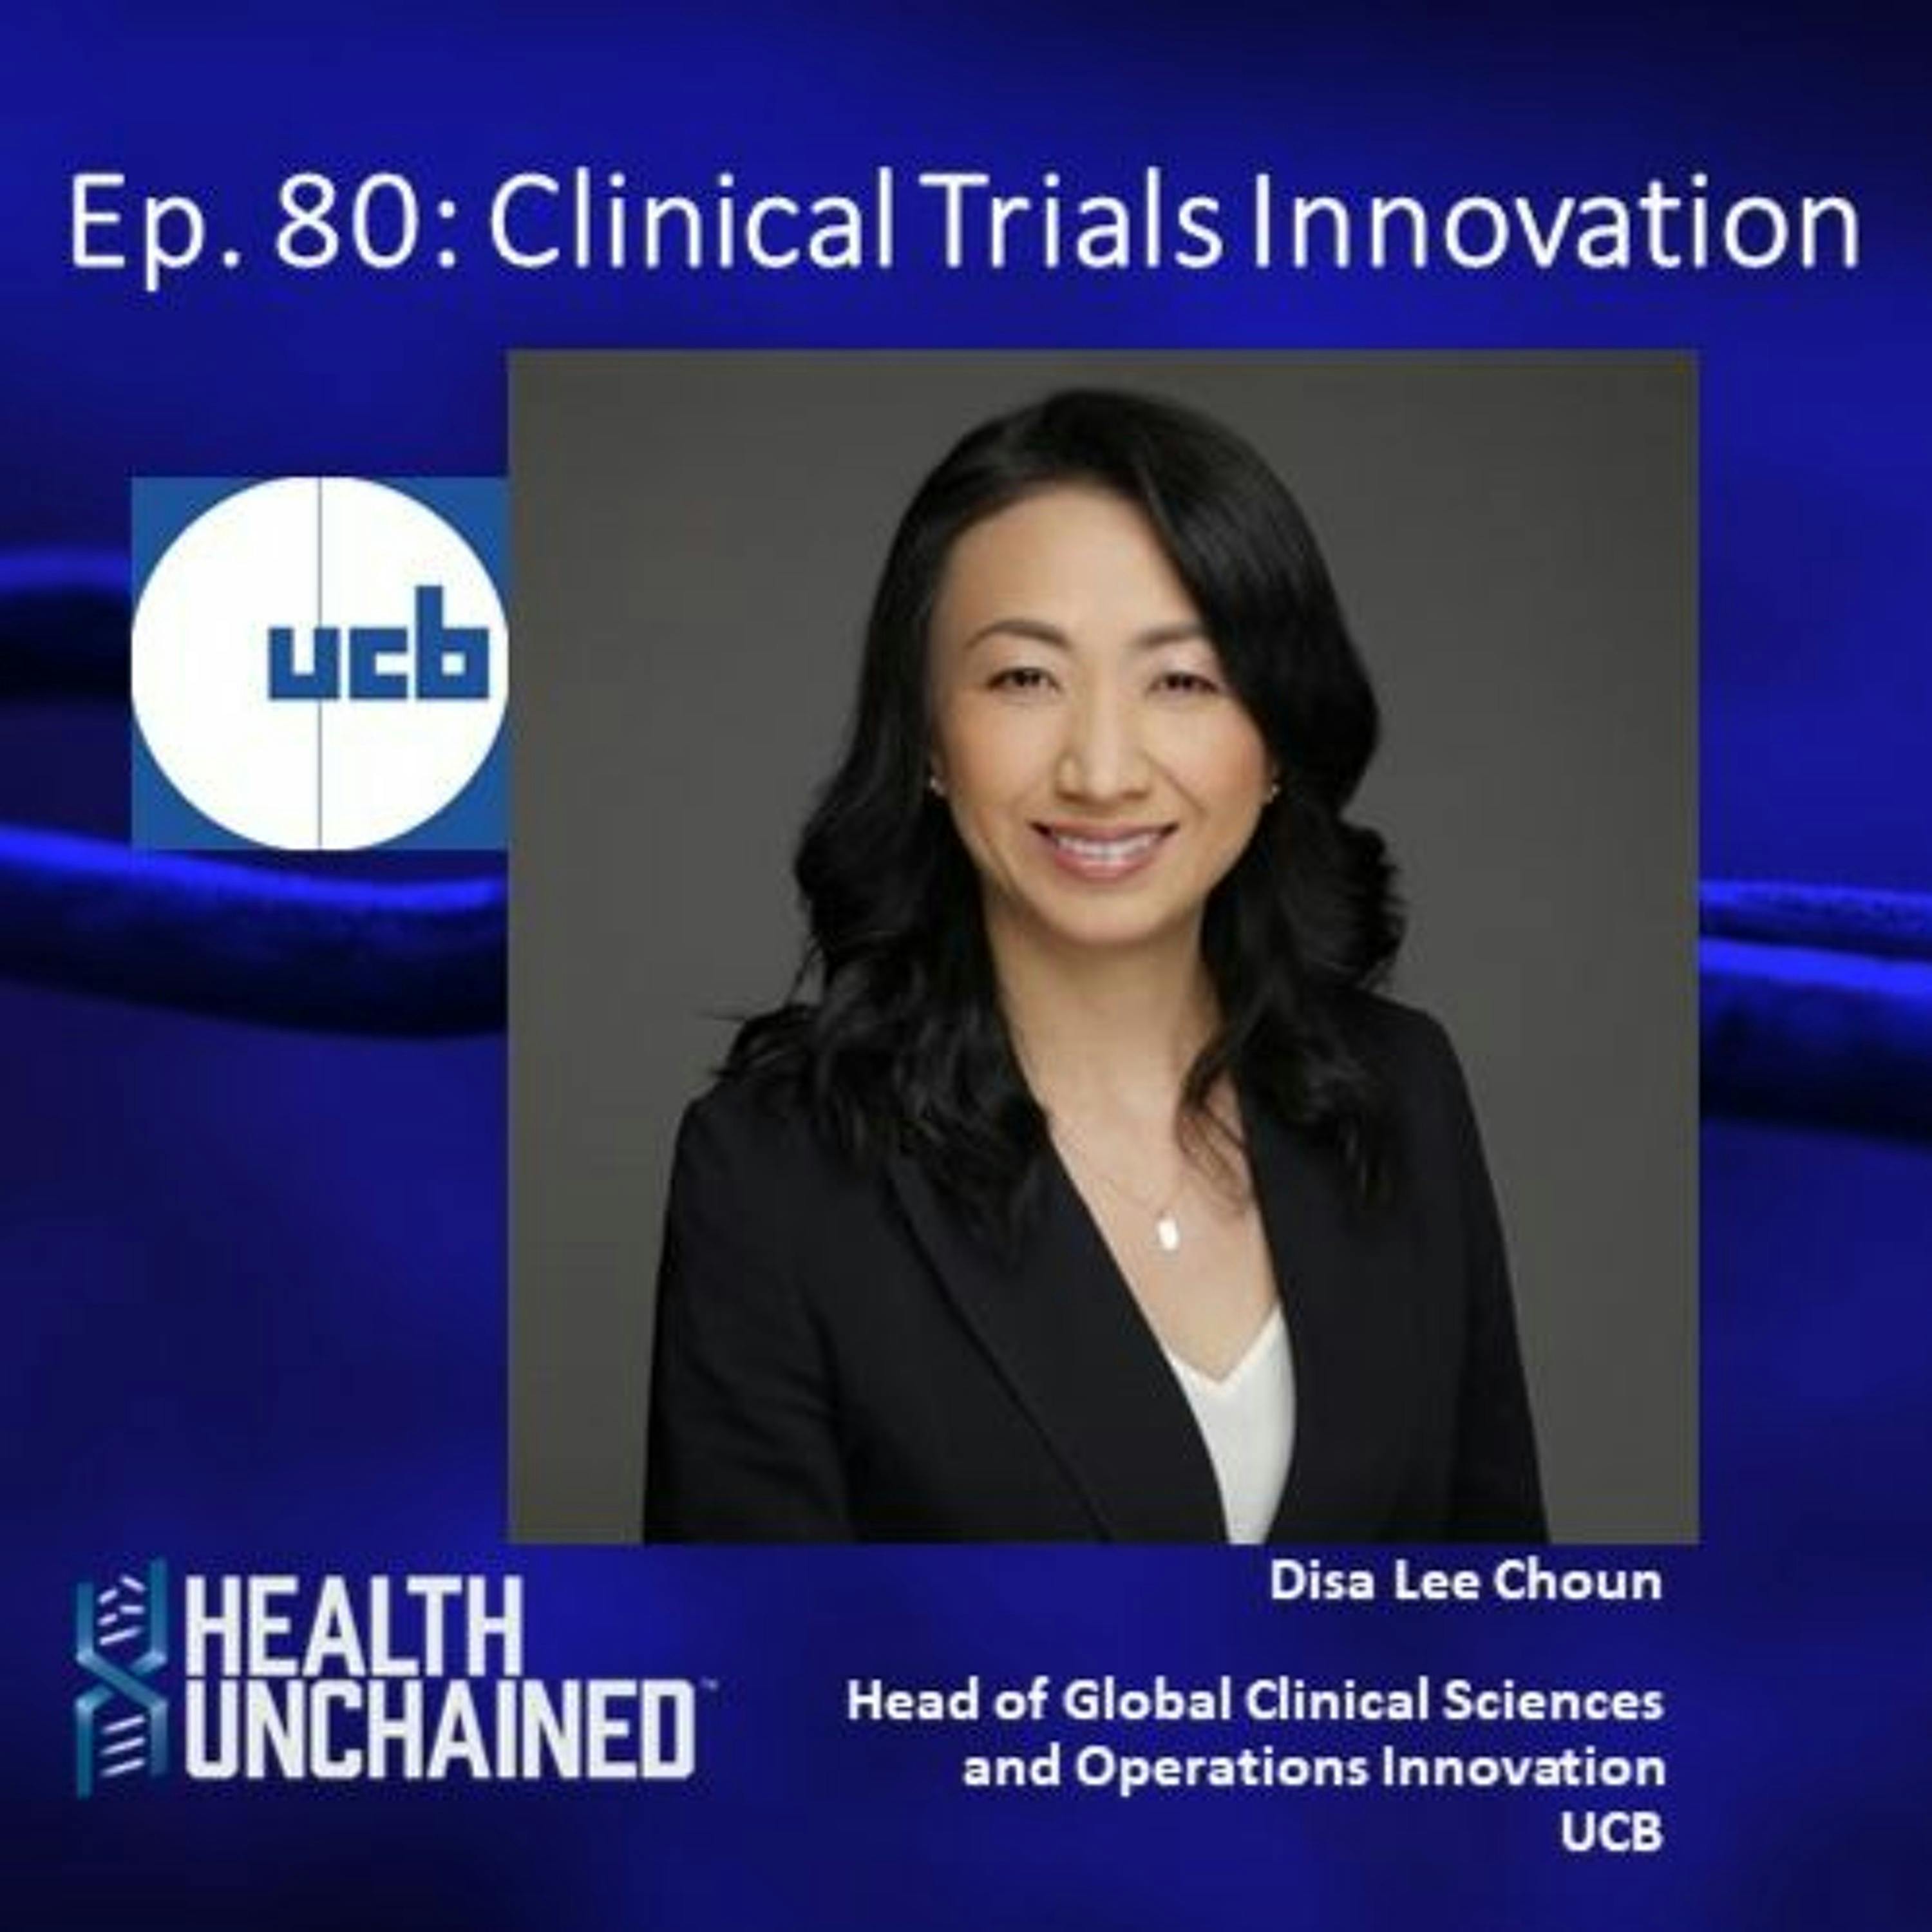 Ep. 80: Clinical Sciences and Operations Innovation – Disa Lee Choun (UCB)